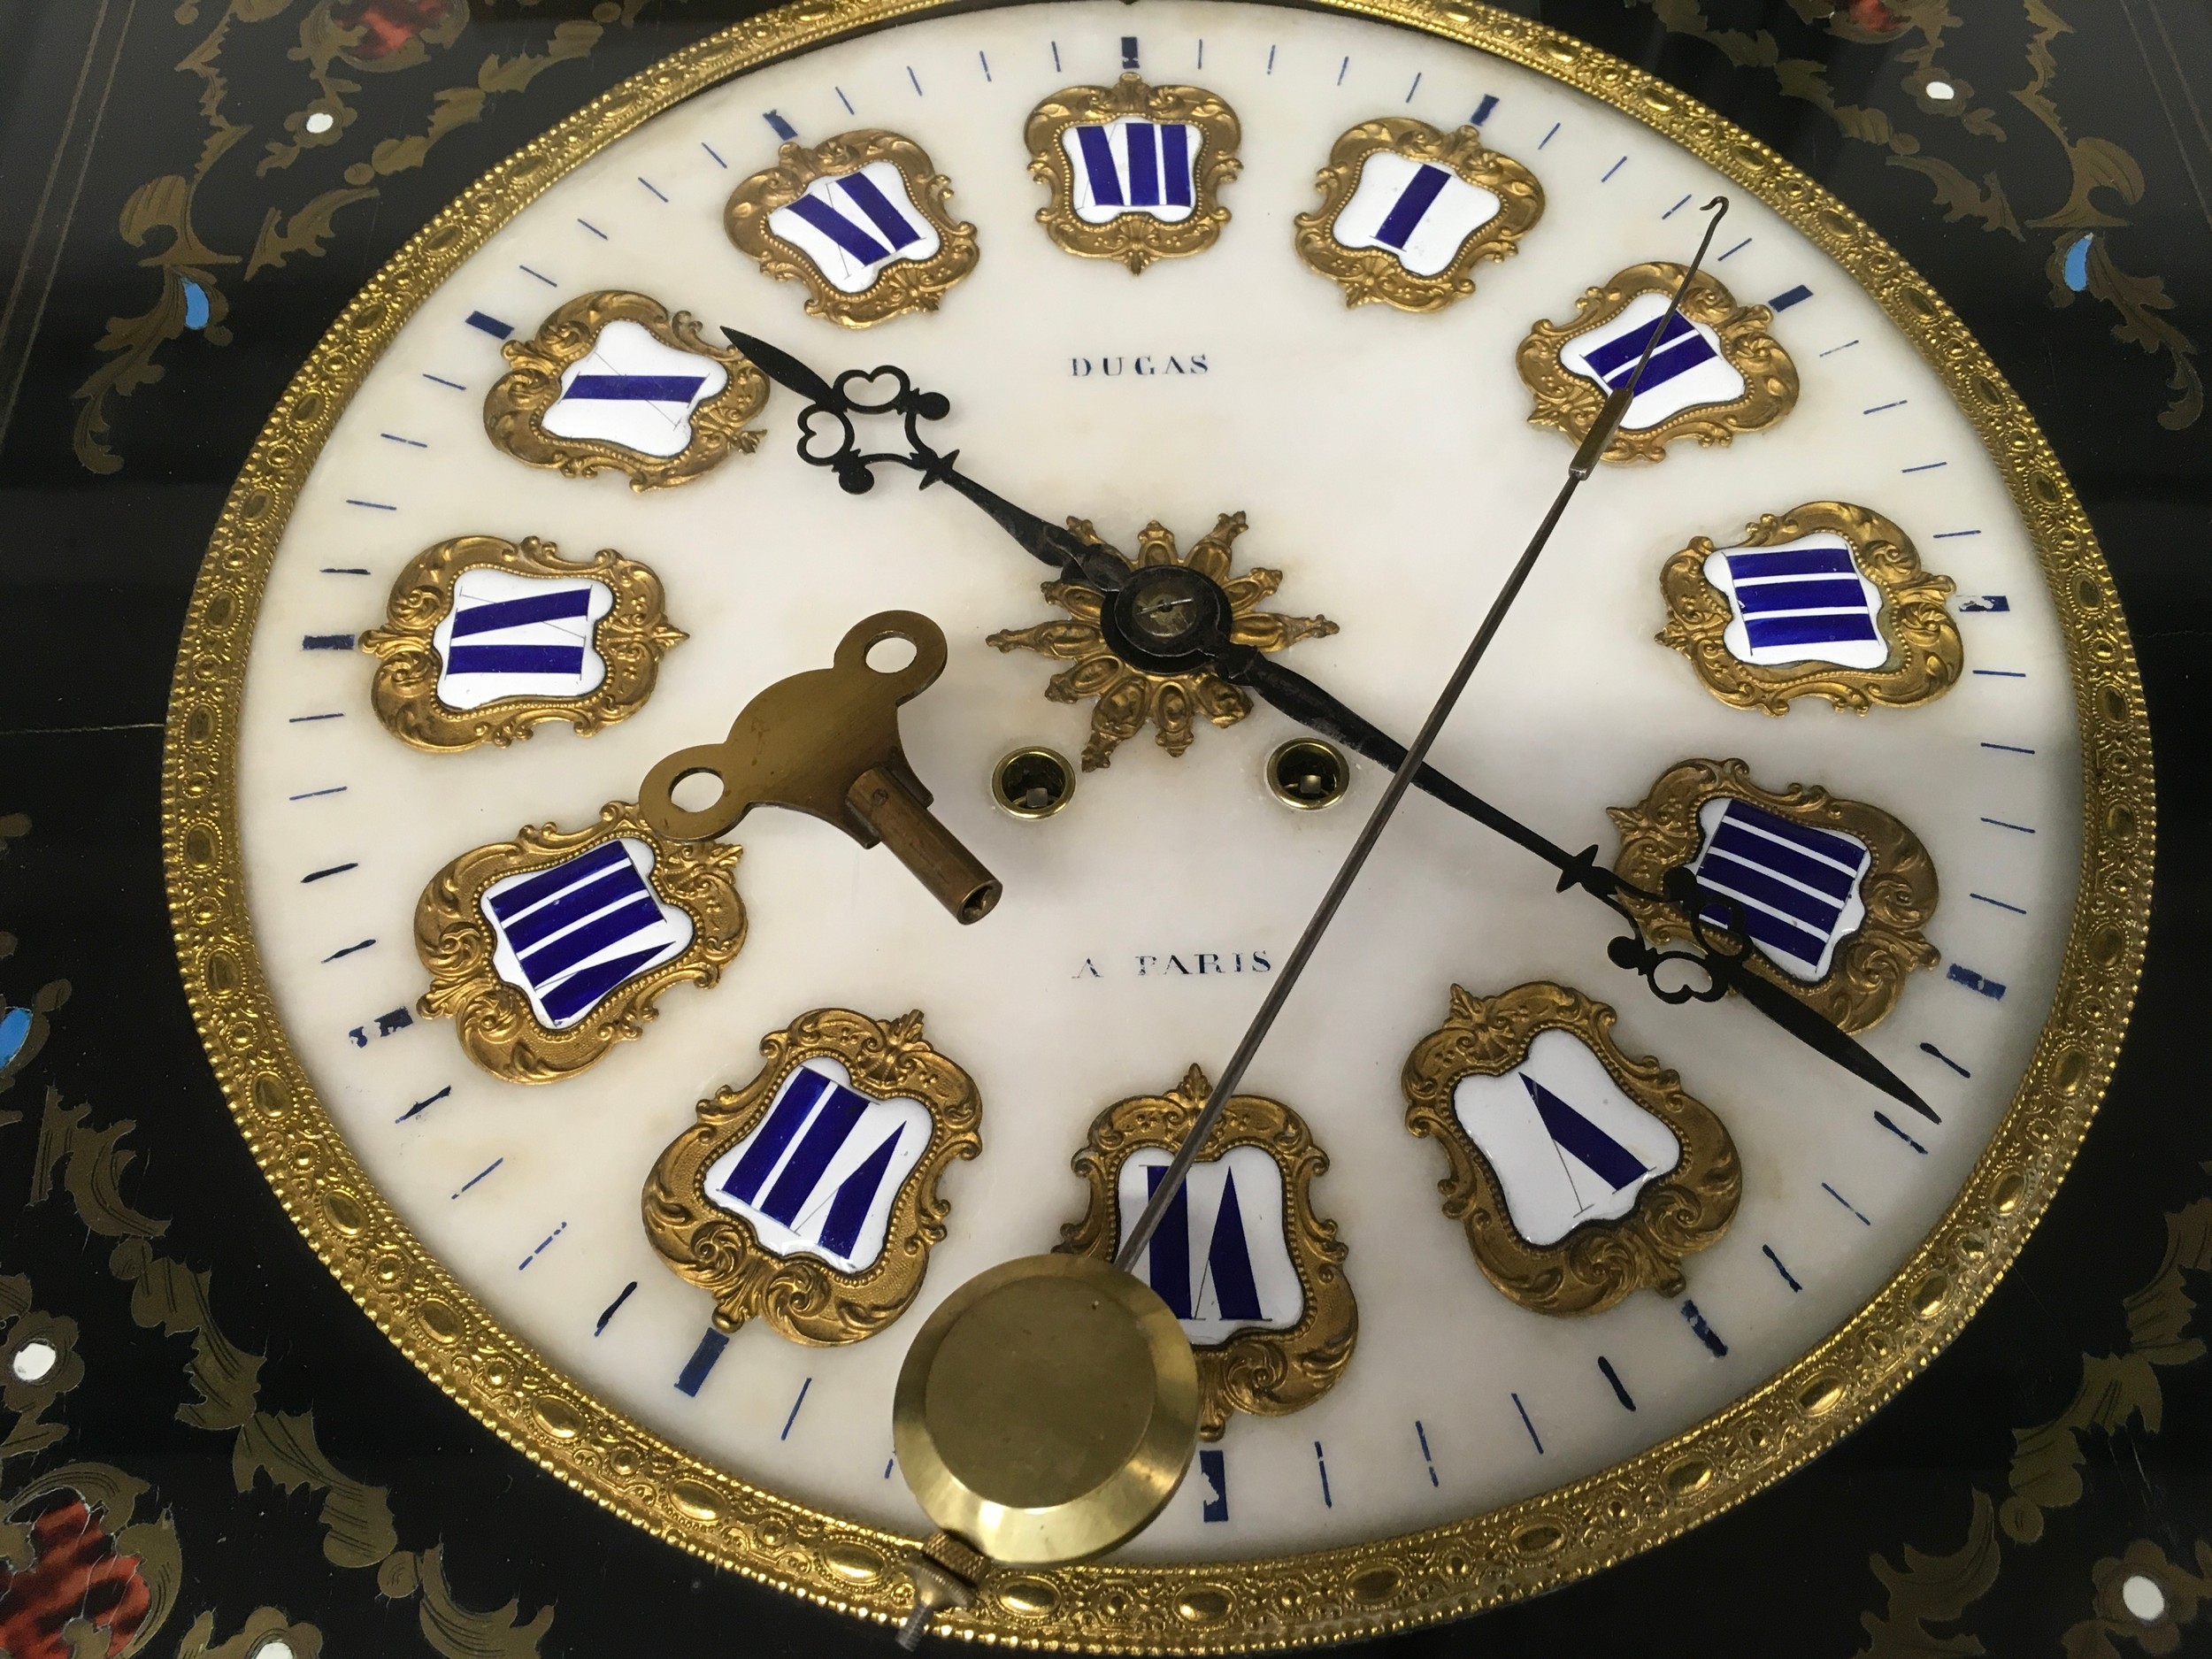 Quality wall clock with gilded enamel hour markers, signed Dugas a Paris to dial. Housed in a glazed - Image 9 of 9